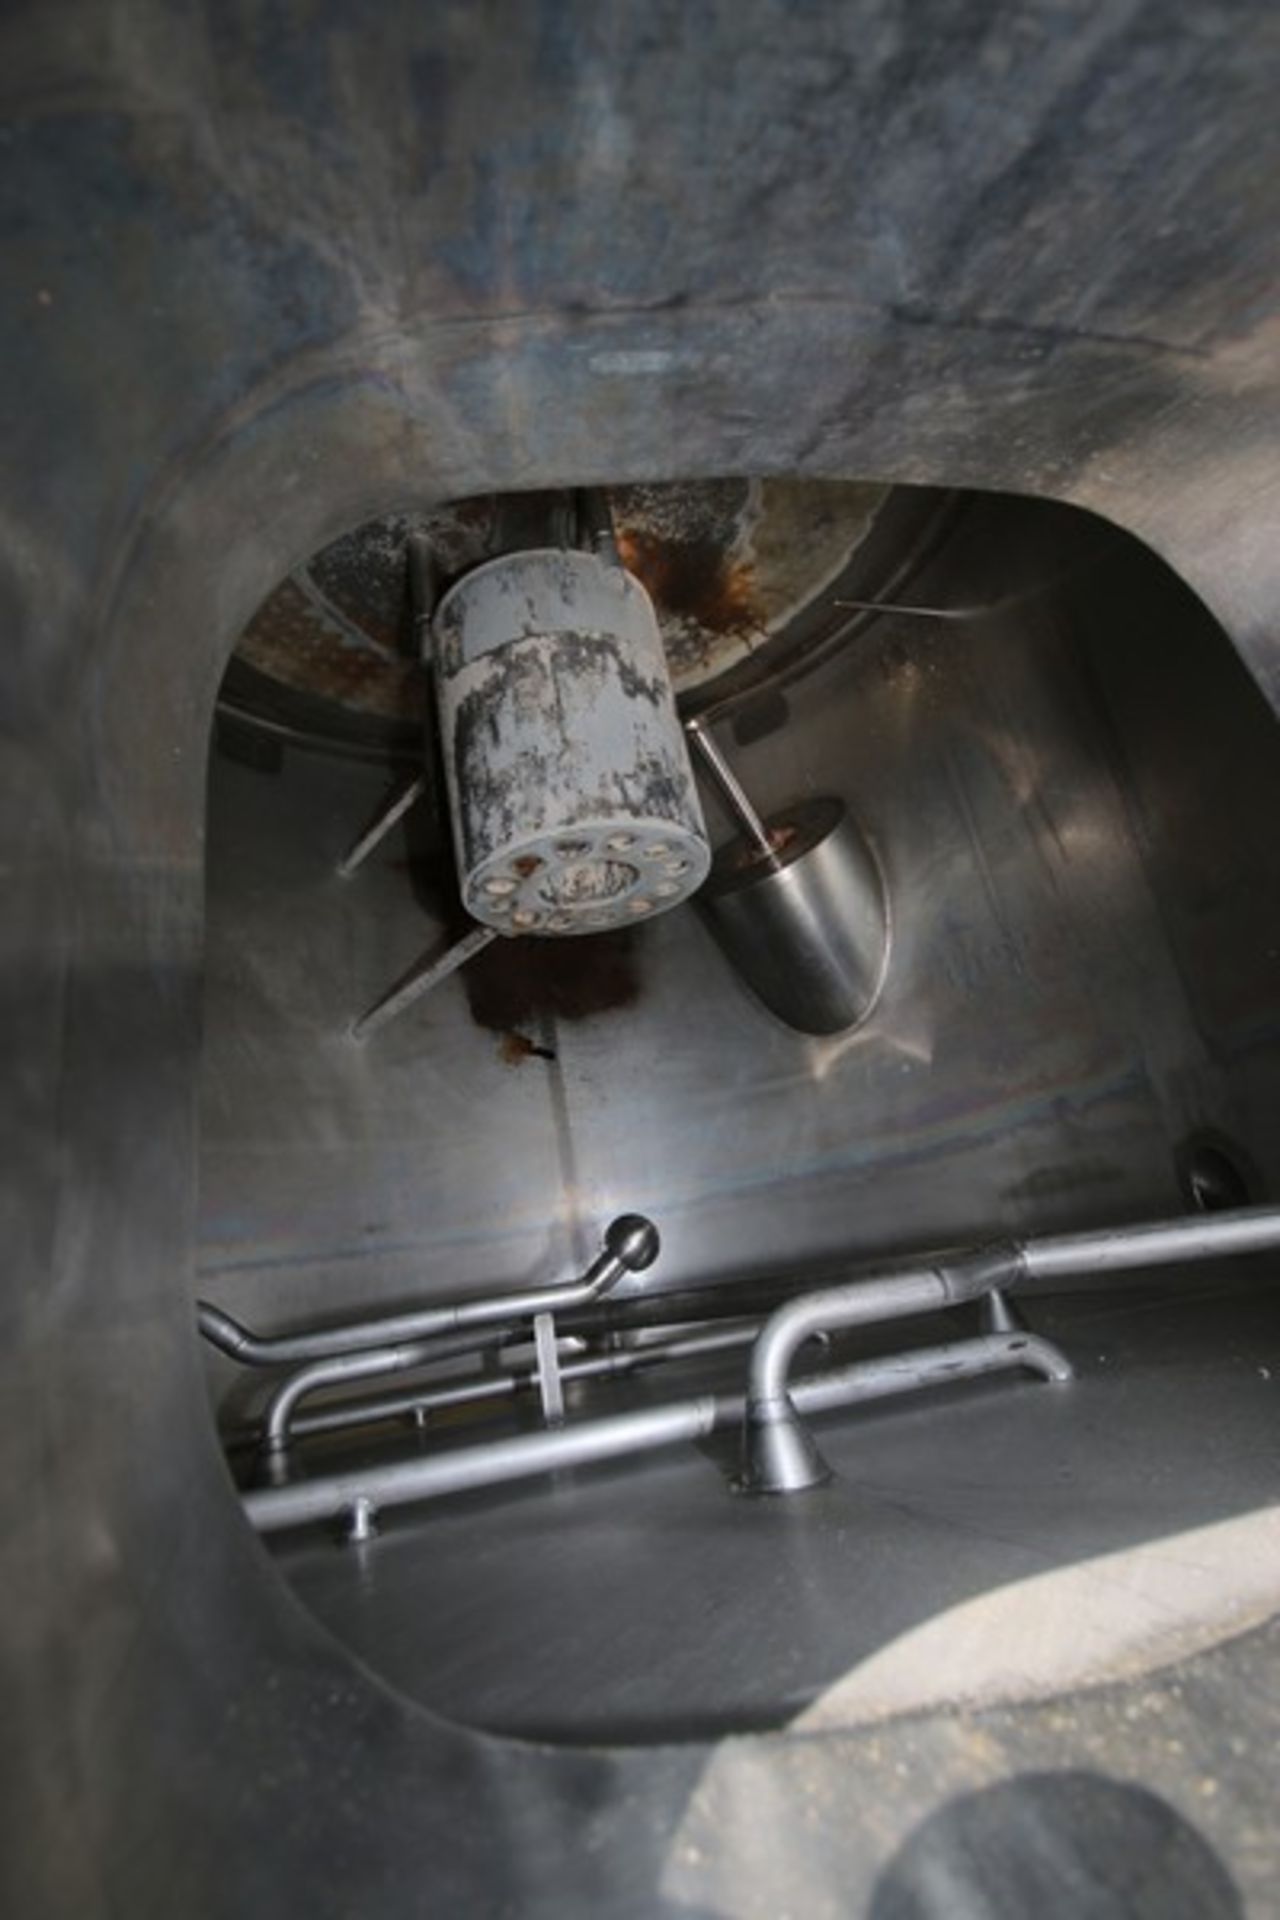 Munker/Braulogistik 15hL Combination Mash Tun/Kettle, M/N Brewhouse, S/N 1, 208 Volts, 3 Phase, with - Image 18 of 24